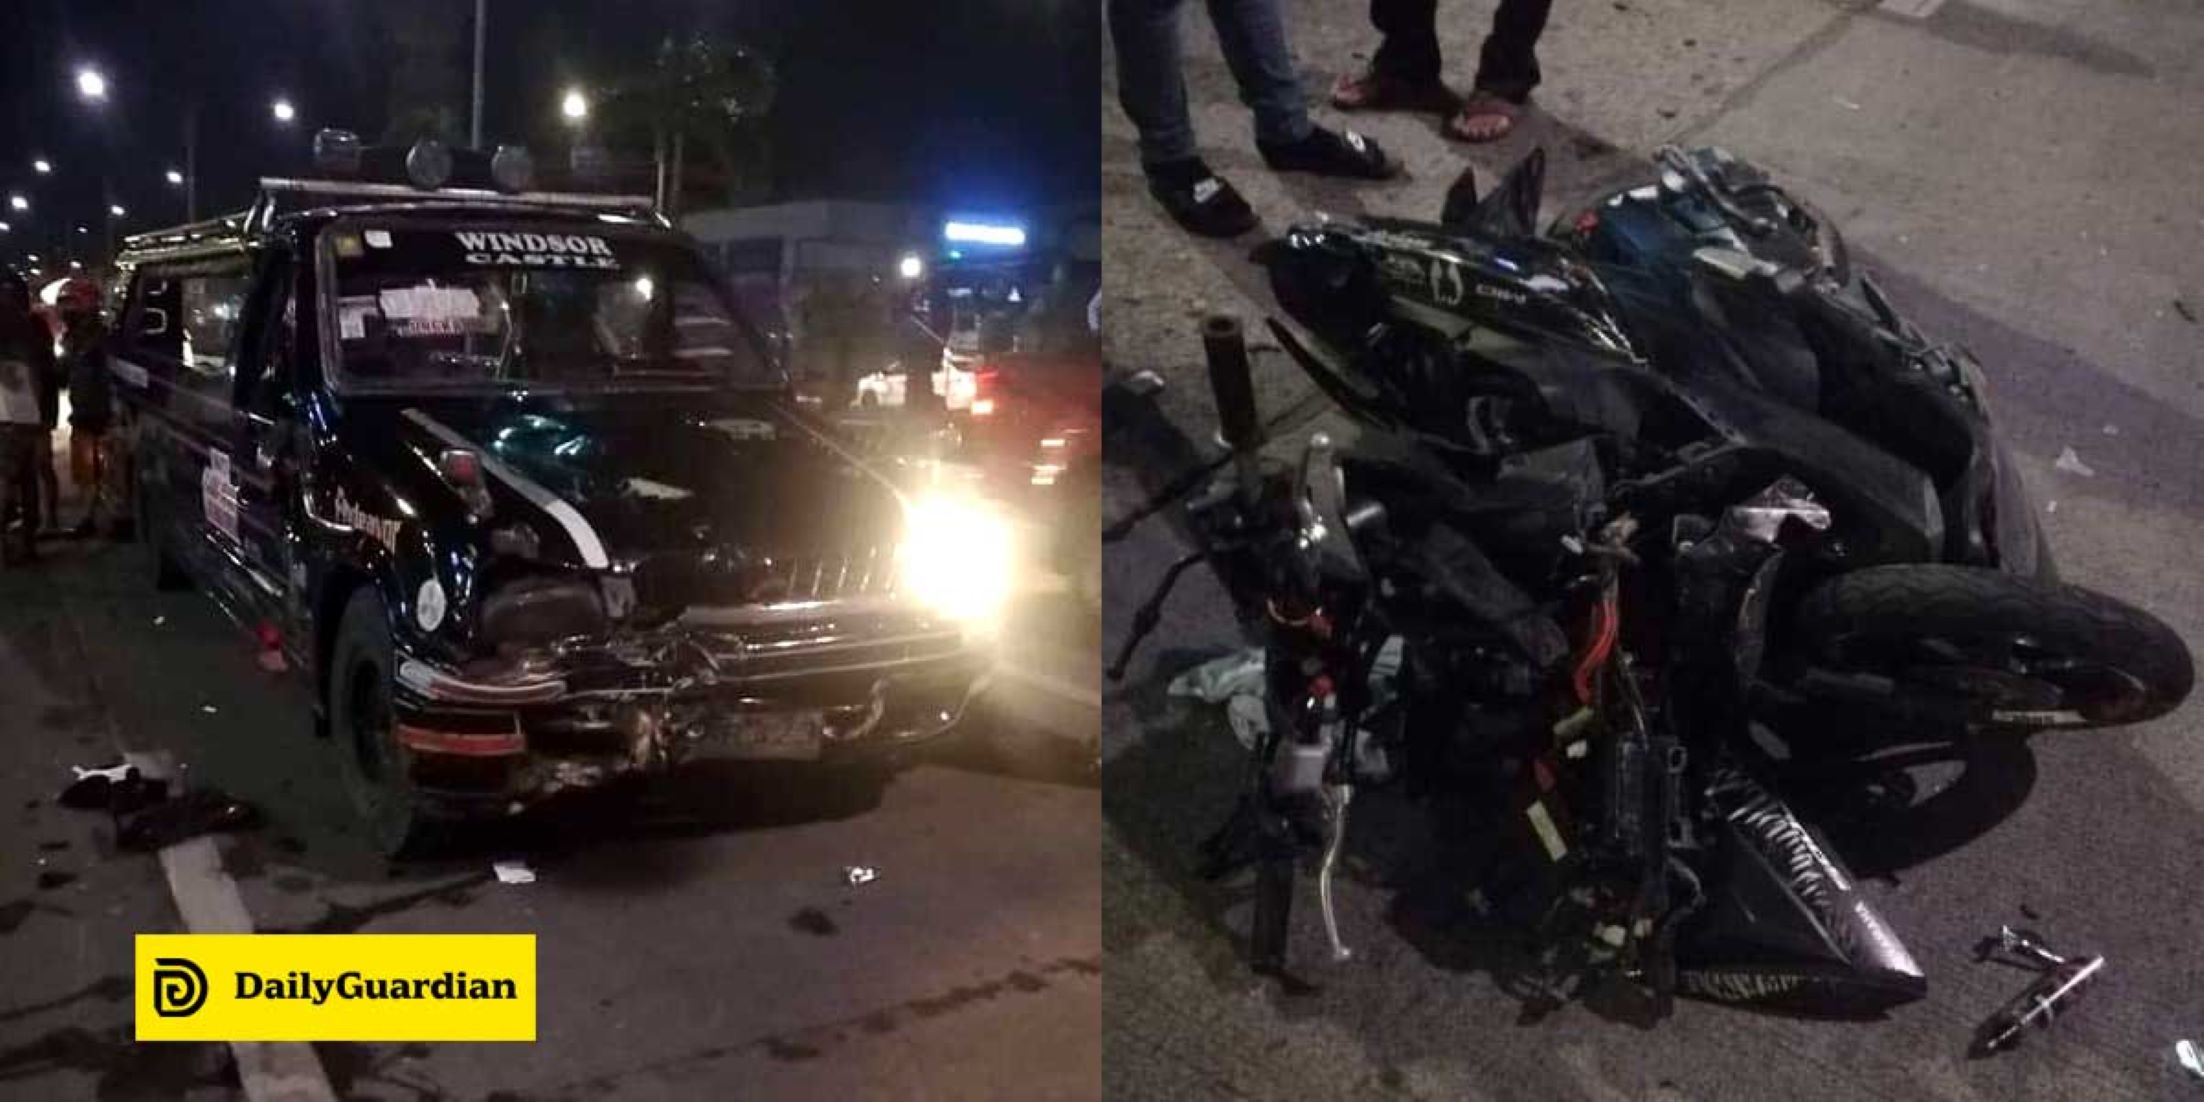 Two Motorcycle Riders Died In Road Crash In Philippines